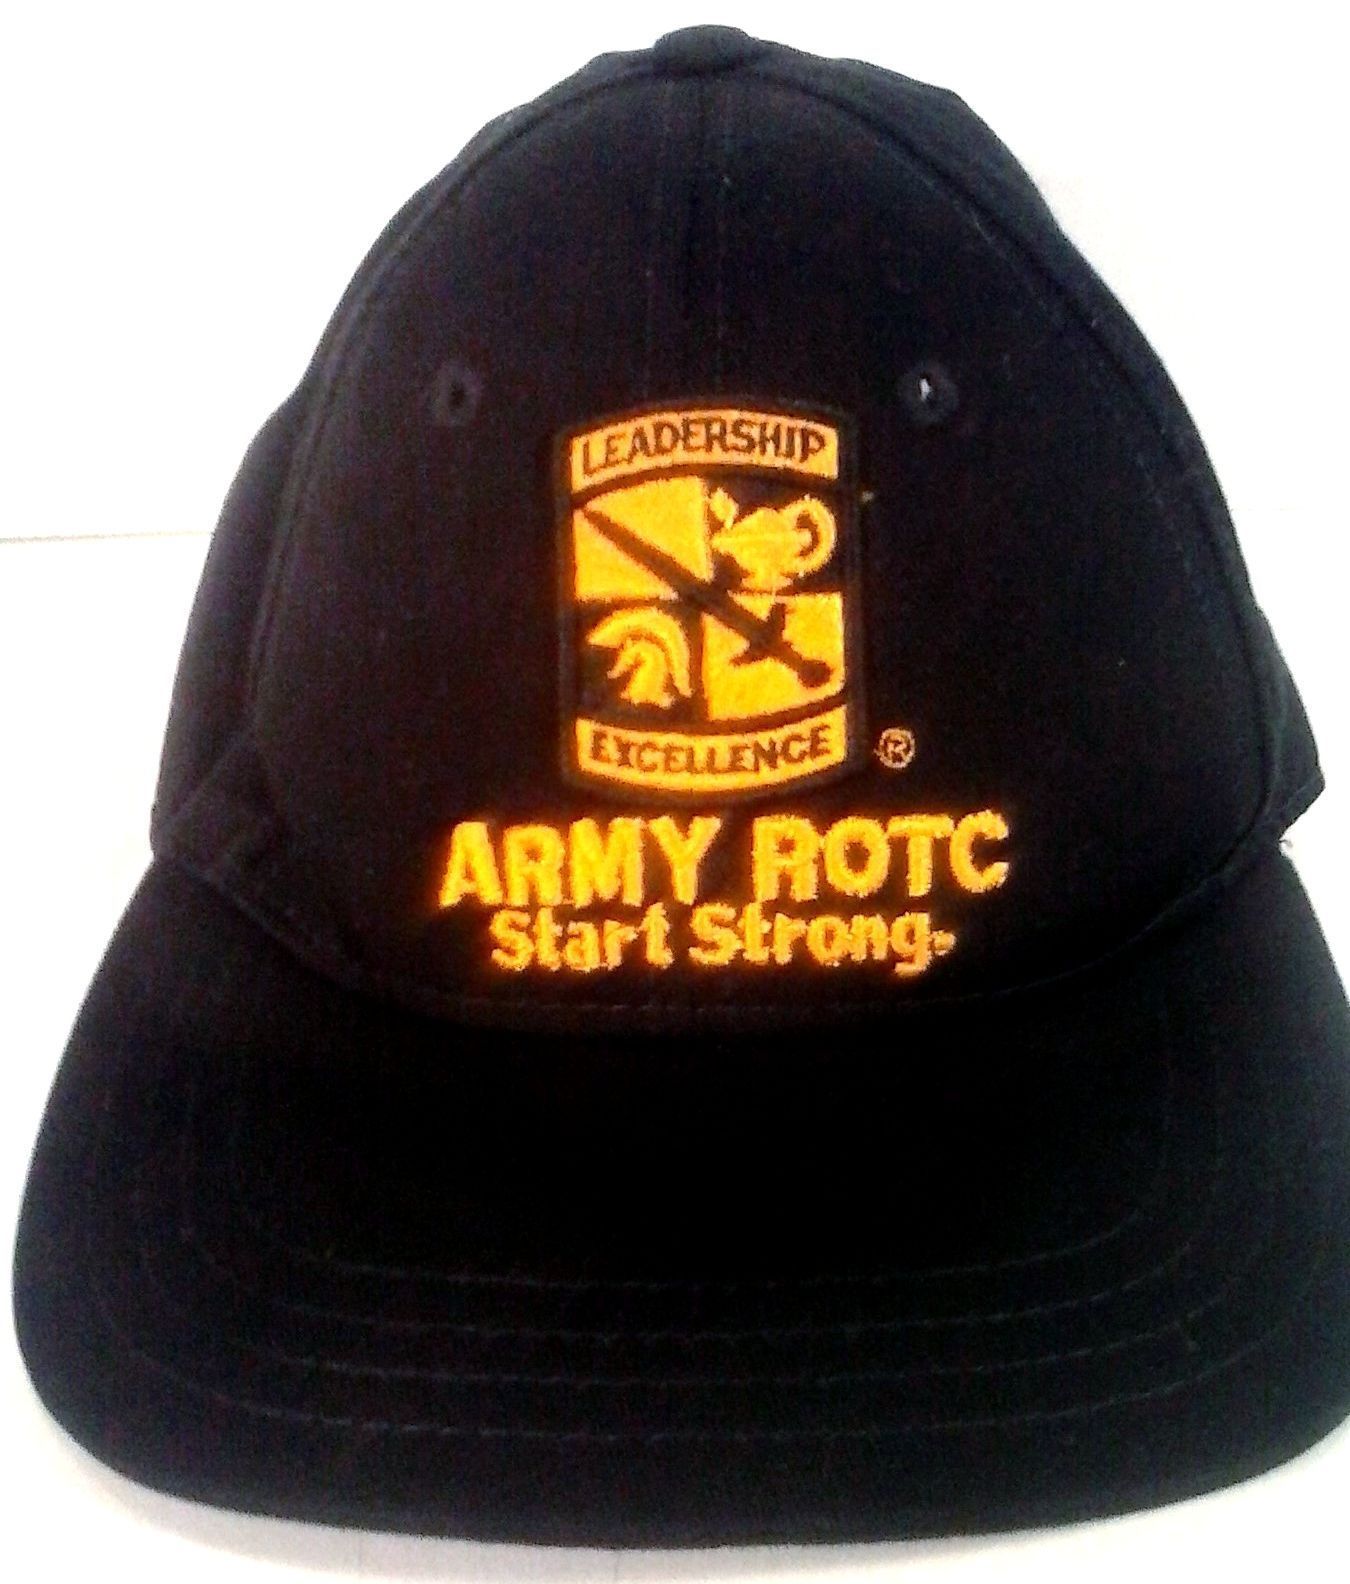 Army Rotc Start Strong Leadership Excellence and 50 similar items